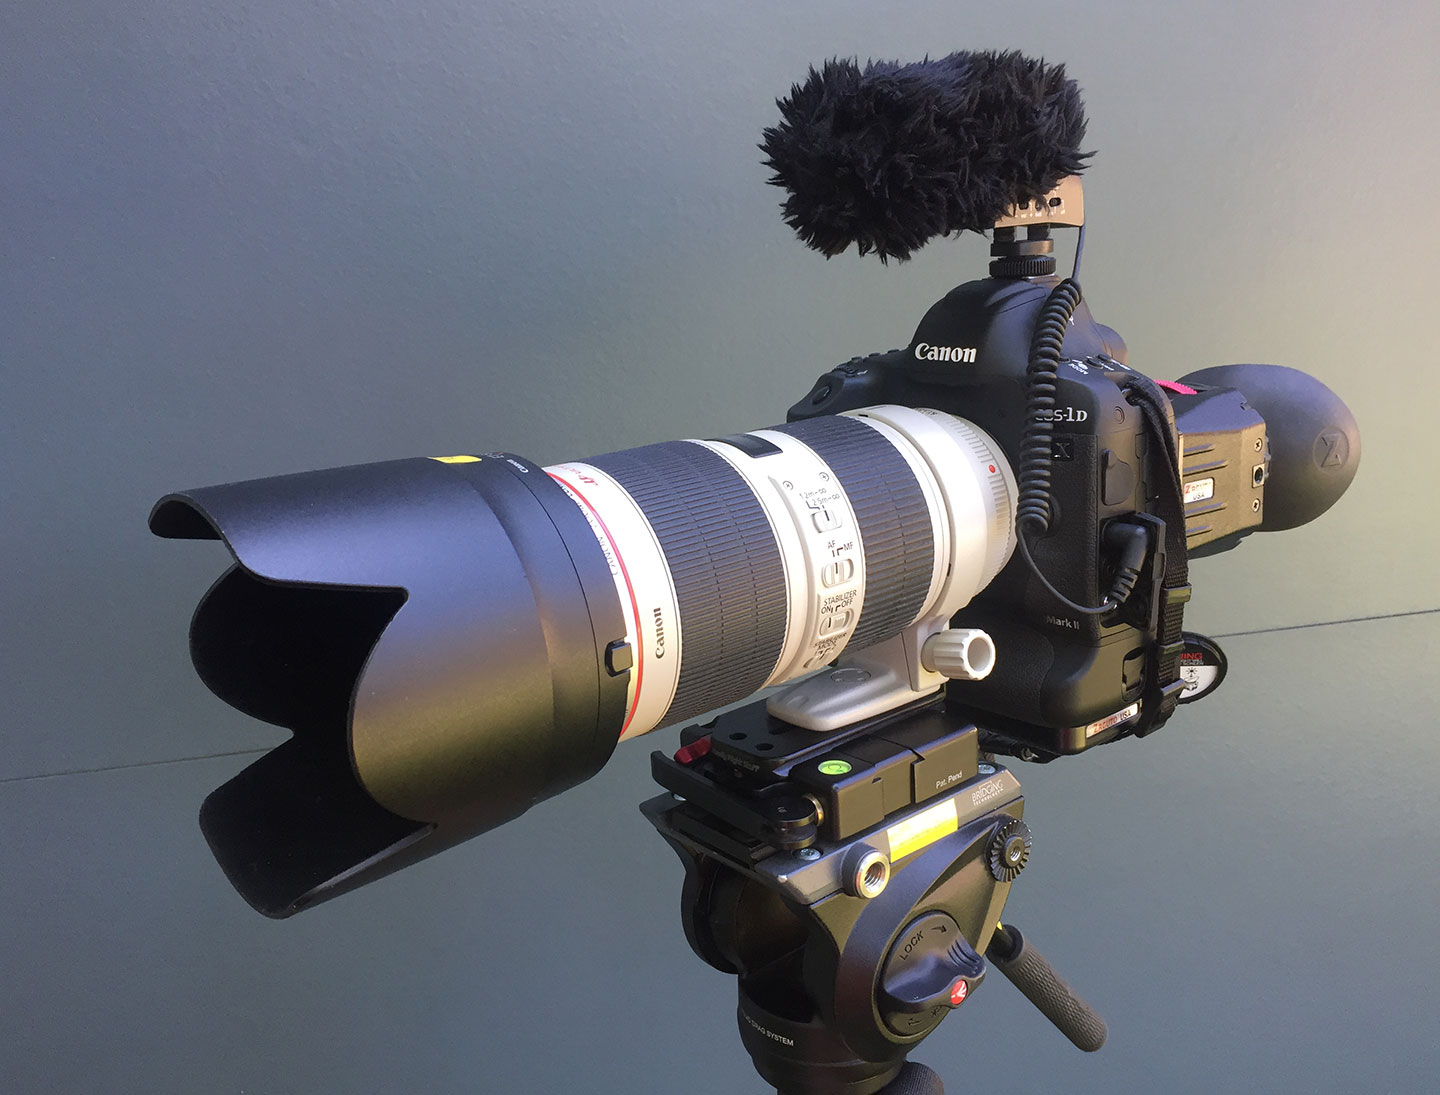 Setup used for was the Canon 1DX Mark II with 80-200 f/2.8L IS II, Sennheiser MKE 400, and Zacuto Z-finder on a Manfrotto Monopod.